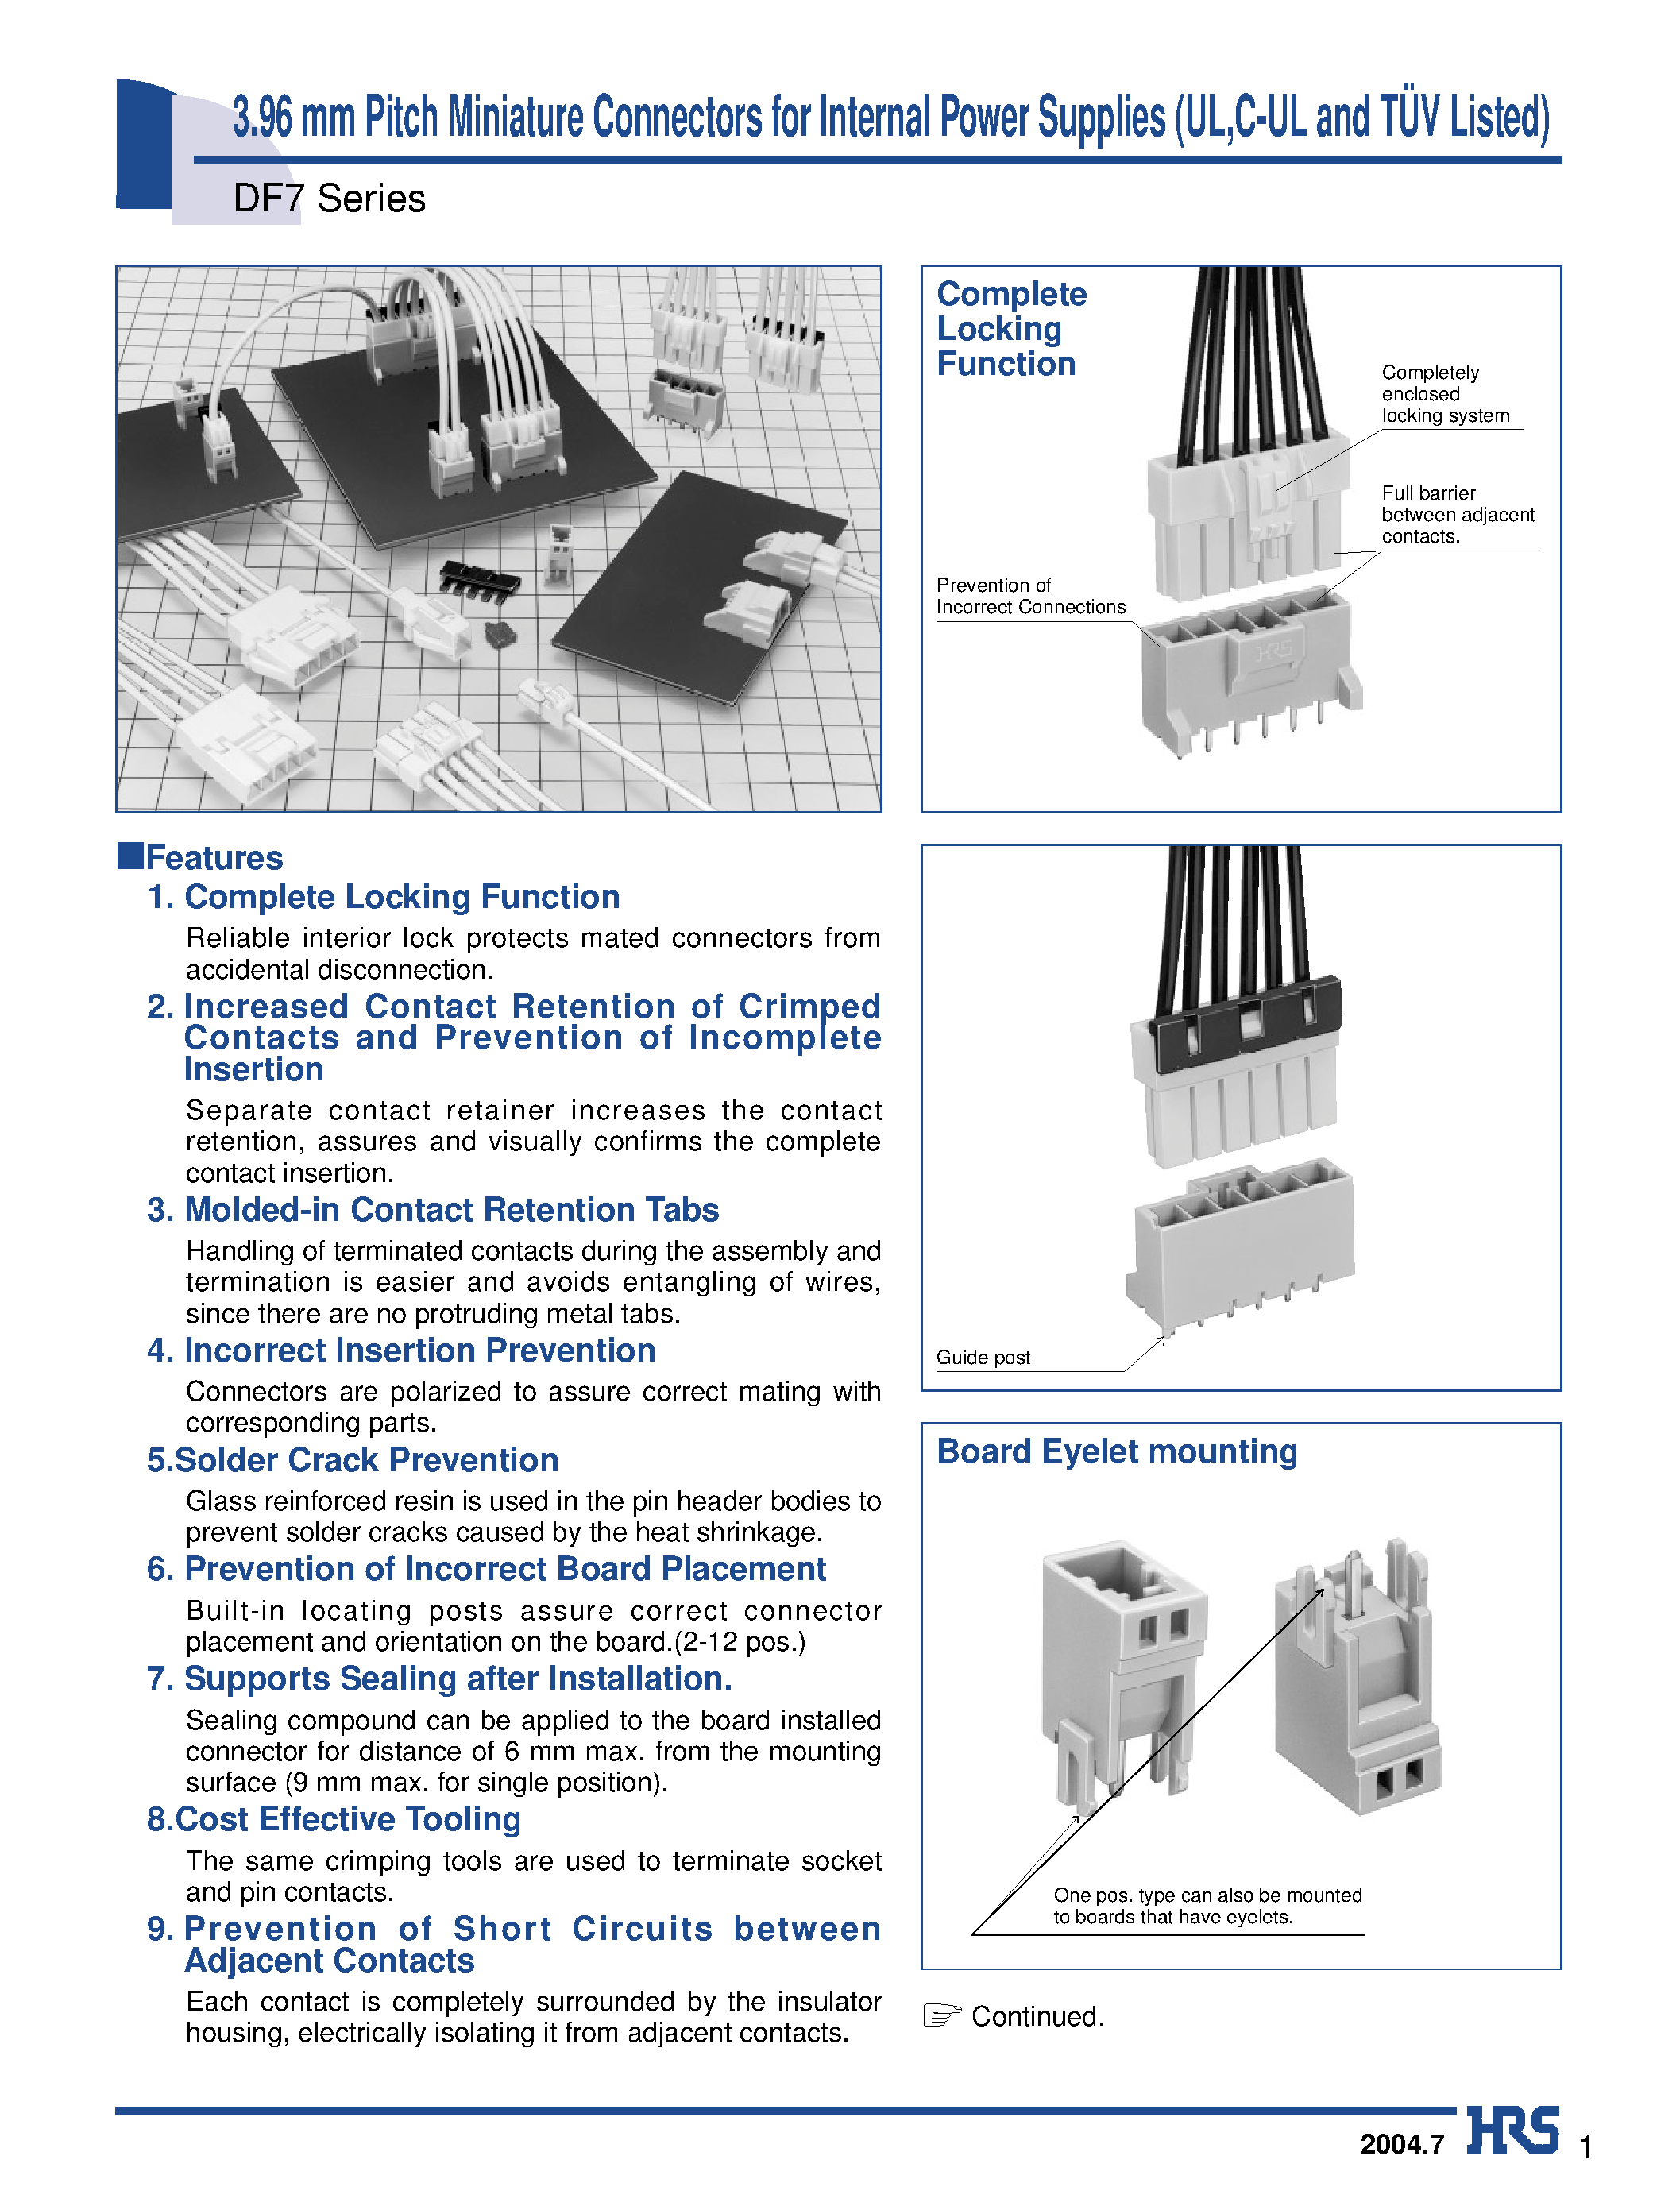 Datasheet DF7-1P-3.96DS - 3.96 mm Pitch Miniature Connectors for Internal Power Supplies (UL /C-UL and TUV Listed) page 1